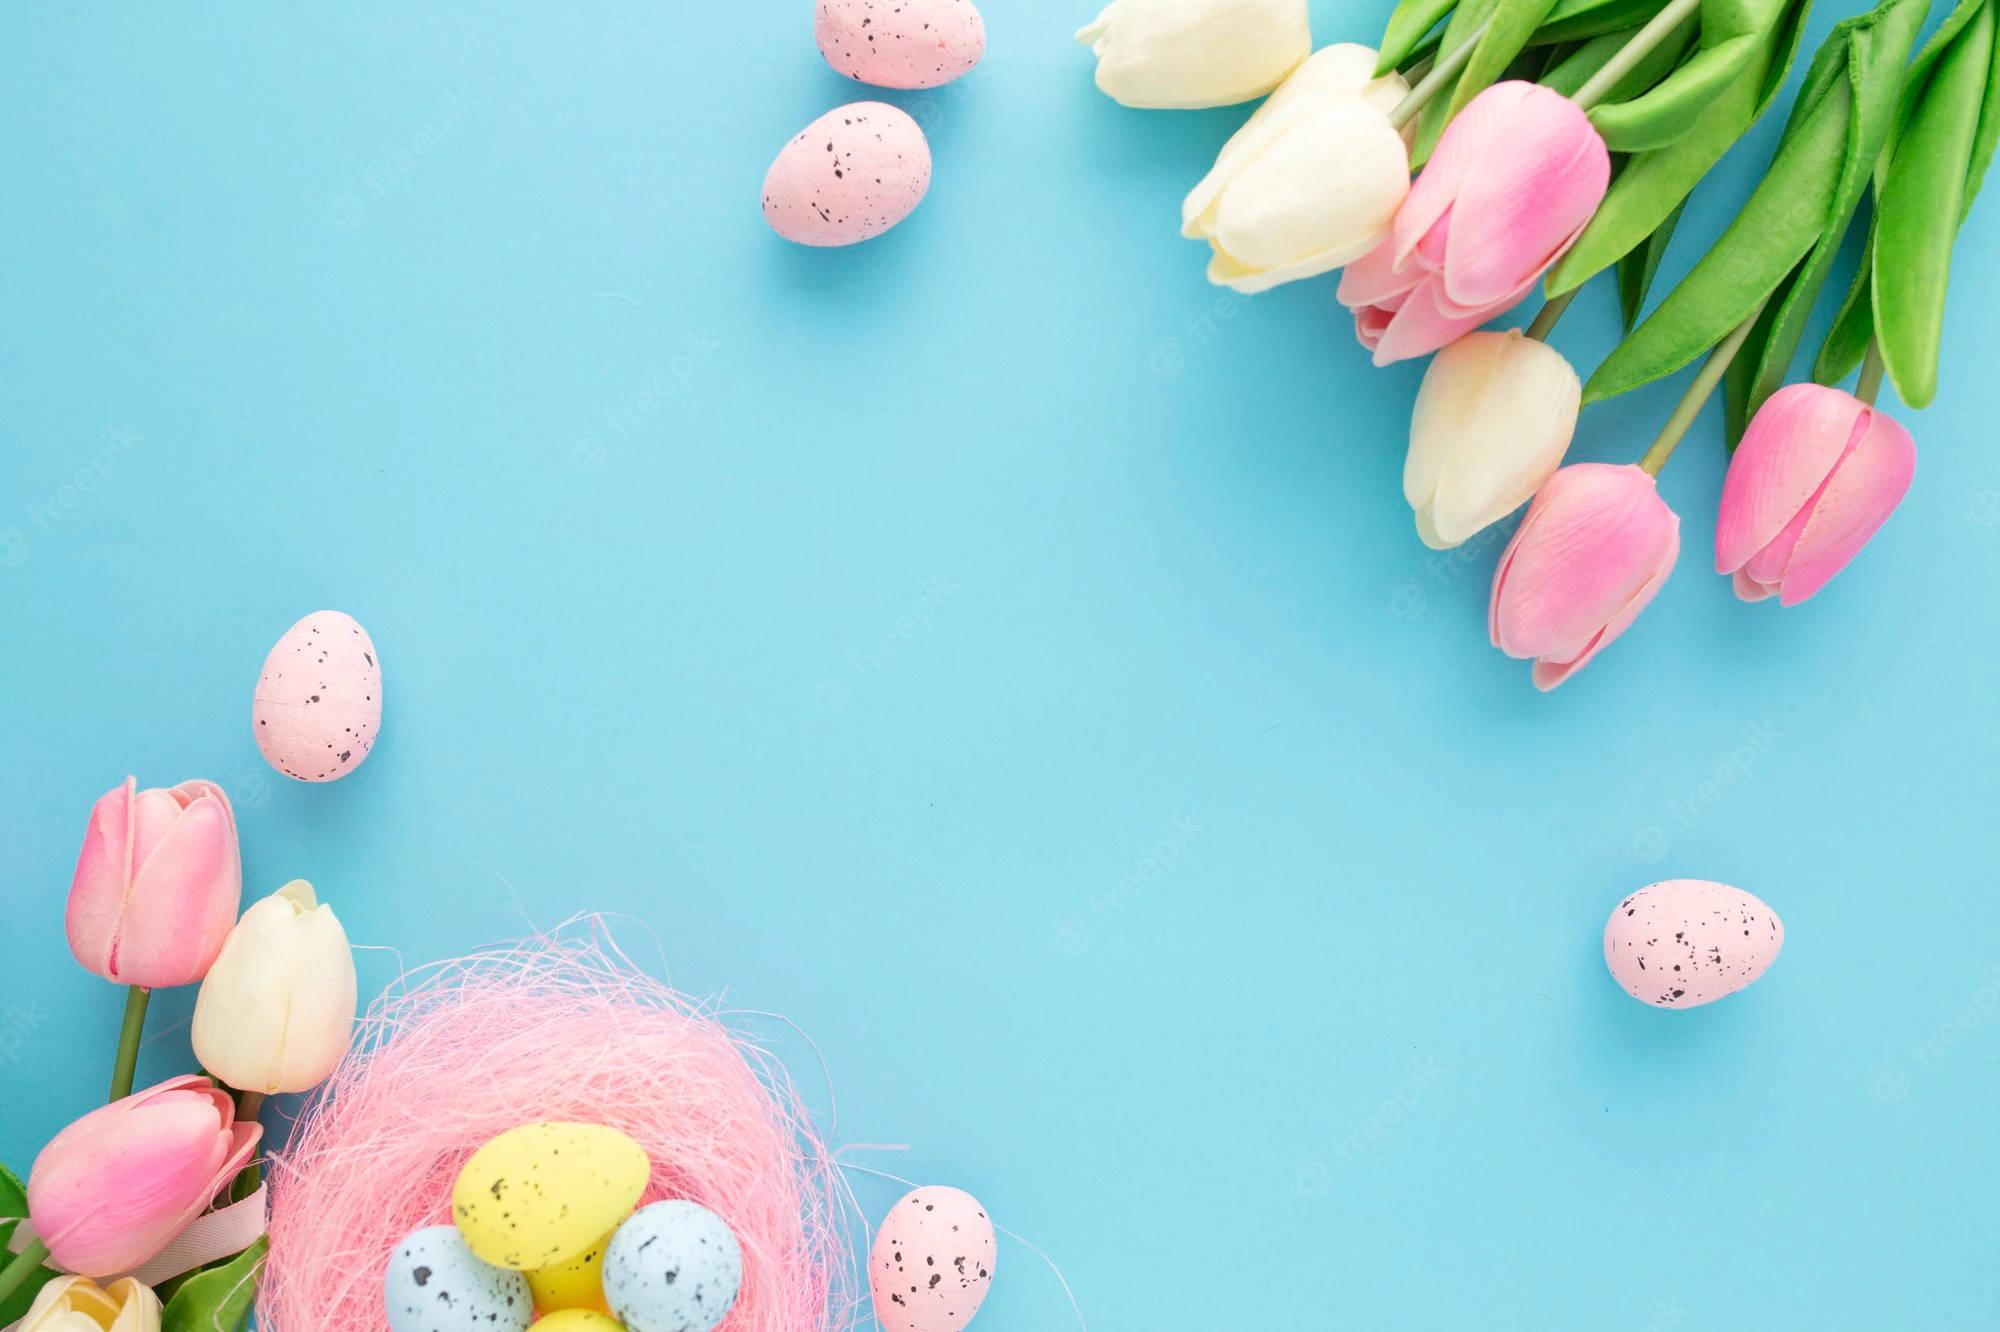 Dreaming Of Colorful Easter Eggs Wallpaper